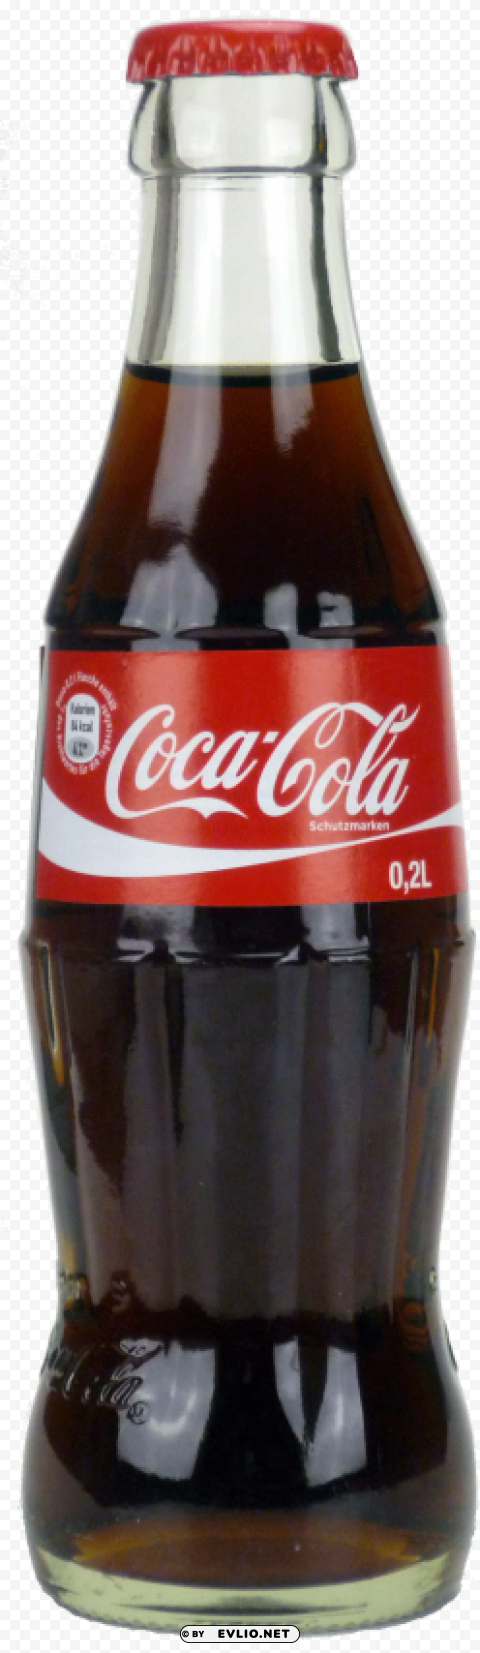 coca cola bottle PNG with Clear Isolation on Transparent Background